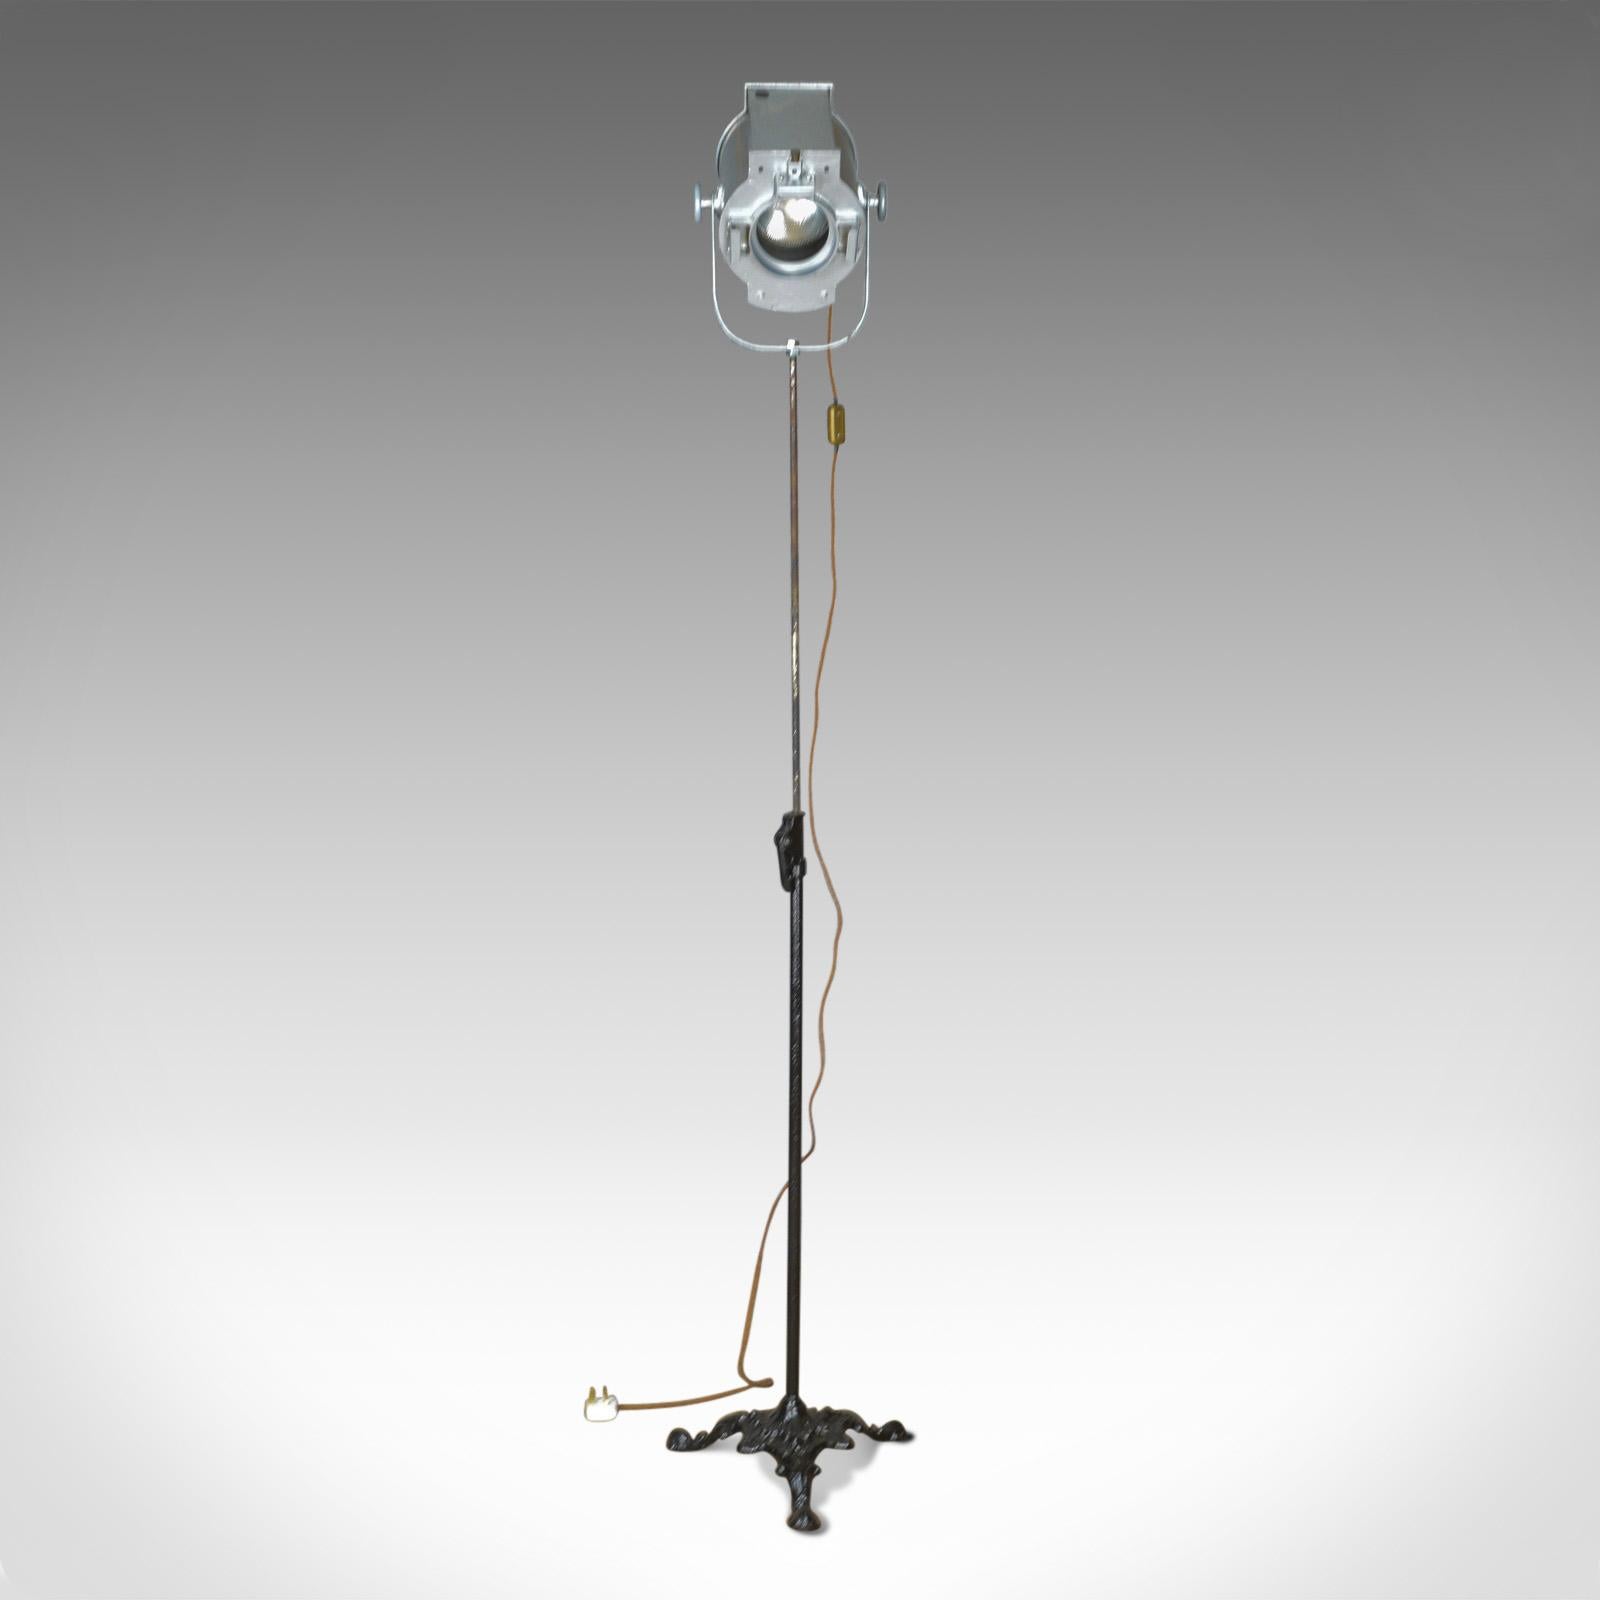 This is a vintage theatre lamp by Hewitt Universal mounted to a Victorian cast iron stand.

Fully working, PAT tested lamp 
Braided cord with in-line switch
Multi-directional with twist lock positioning
Painted Victorian stand provides a good,